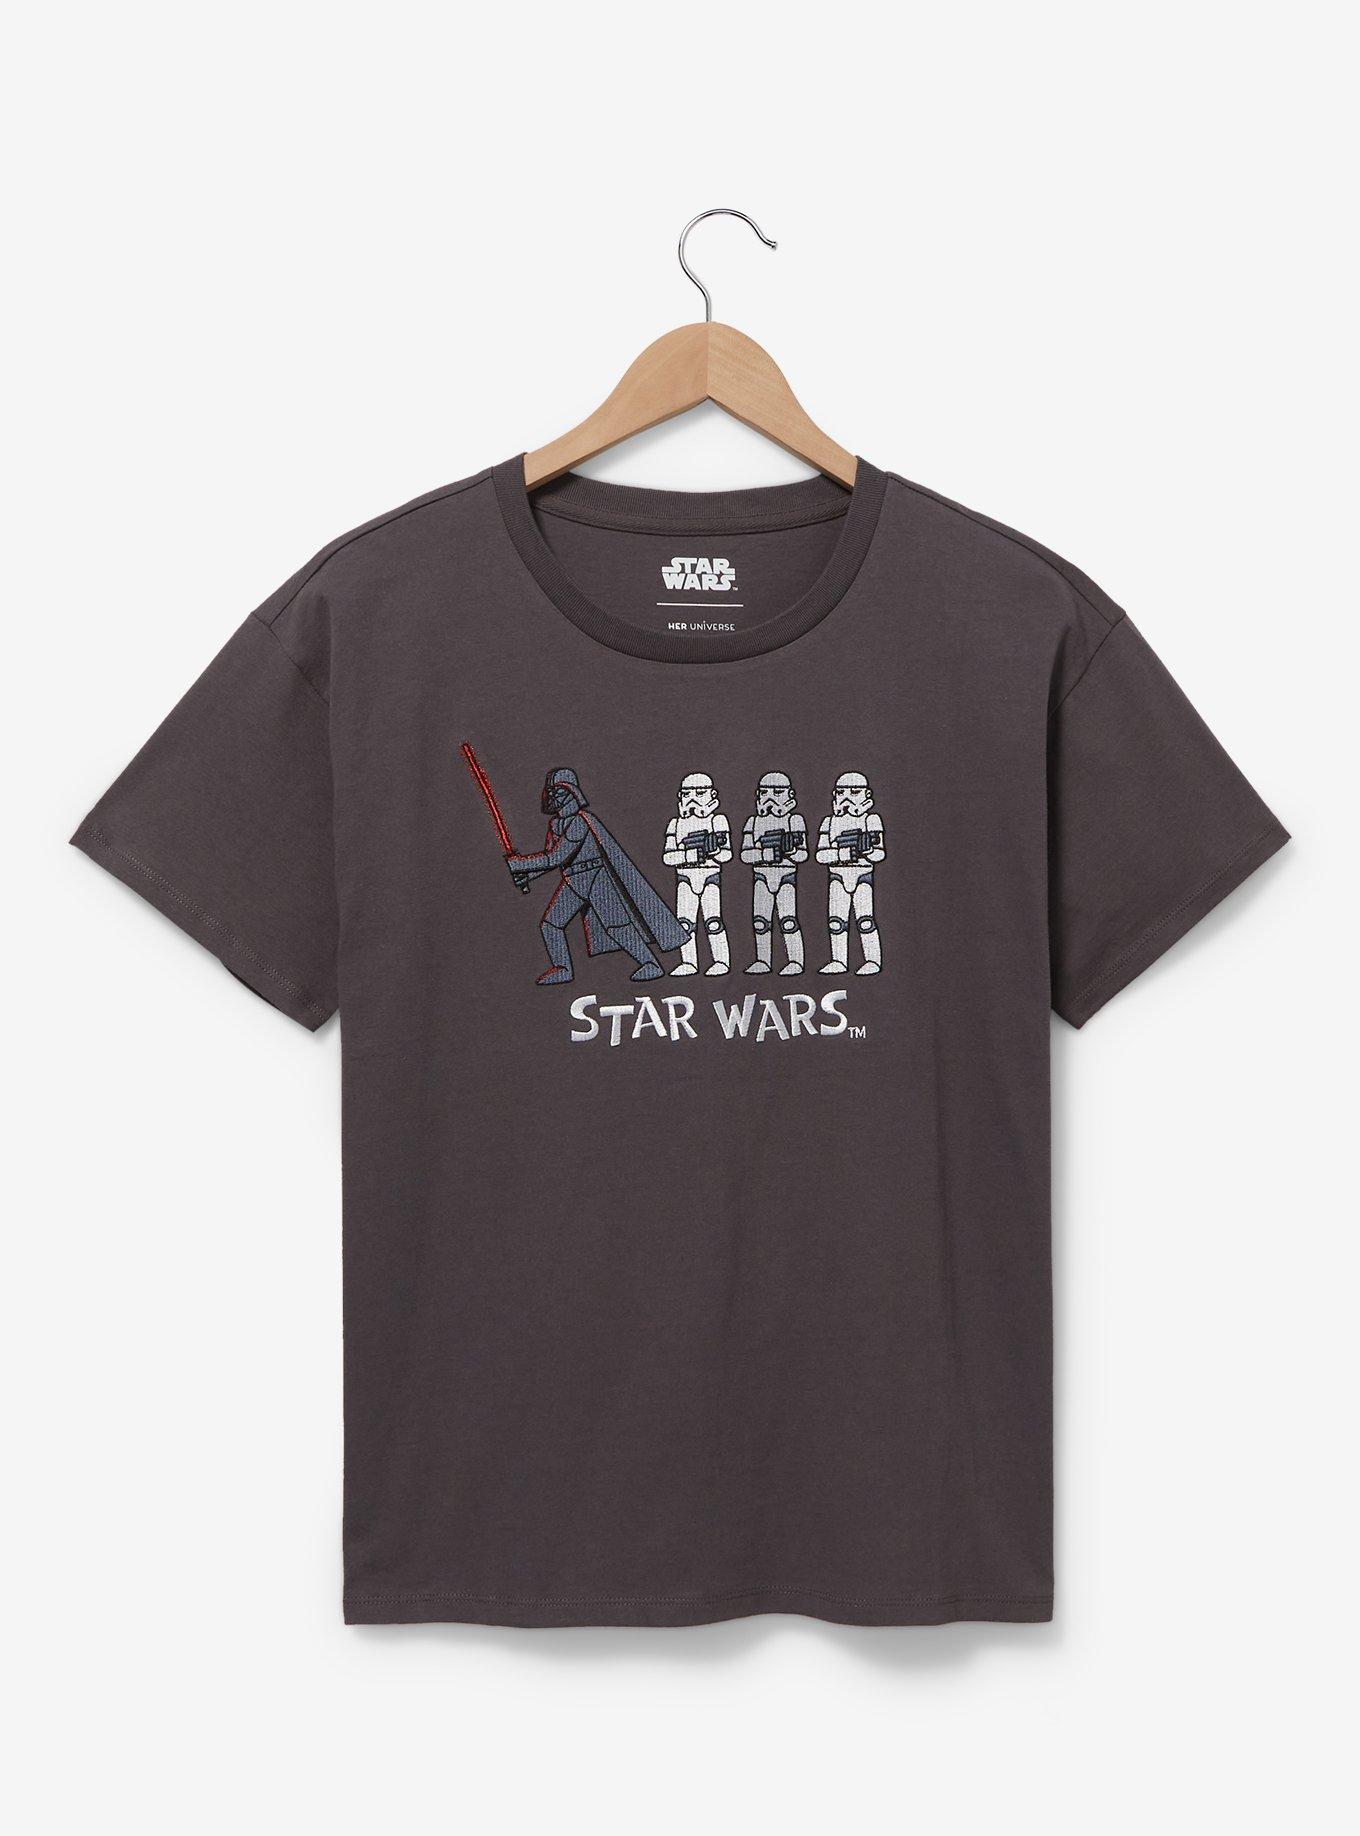 Our Universe Star Wars Darth Vader & Stormtroopers Women's T-Shirt - BoxLunch Exclusive, DARK GRAY, hi-res